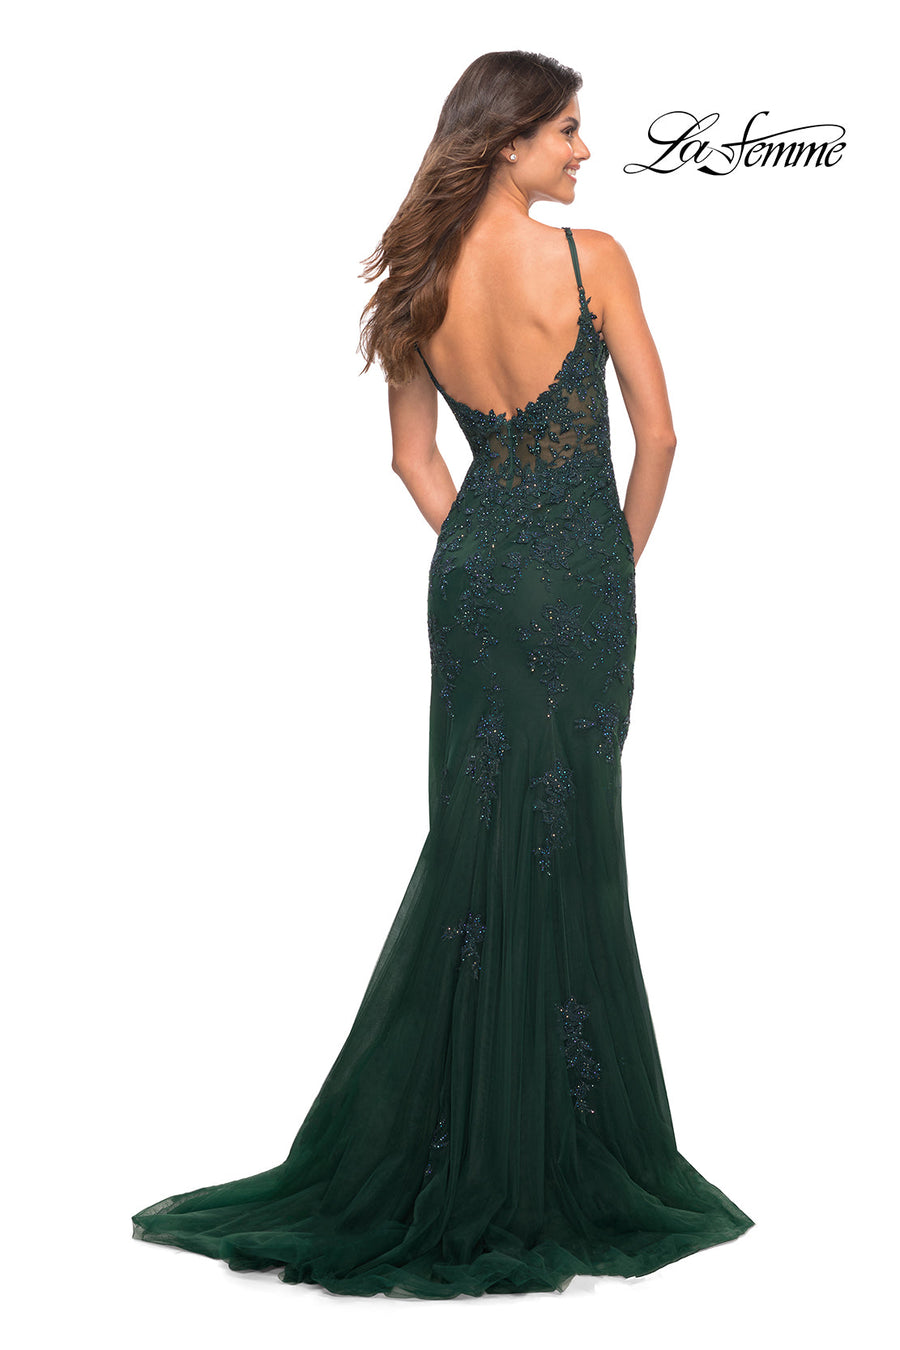 La Femme 30767 prom dress images.  La Femme 30767 is available in these colors: Emerald.